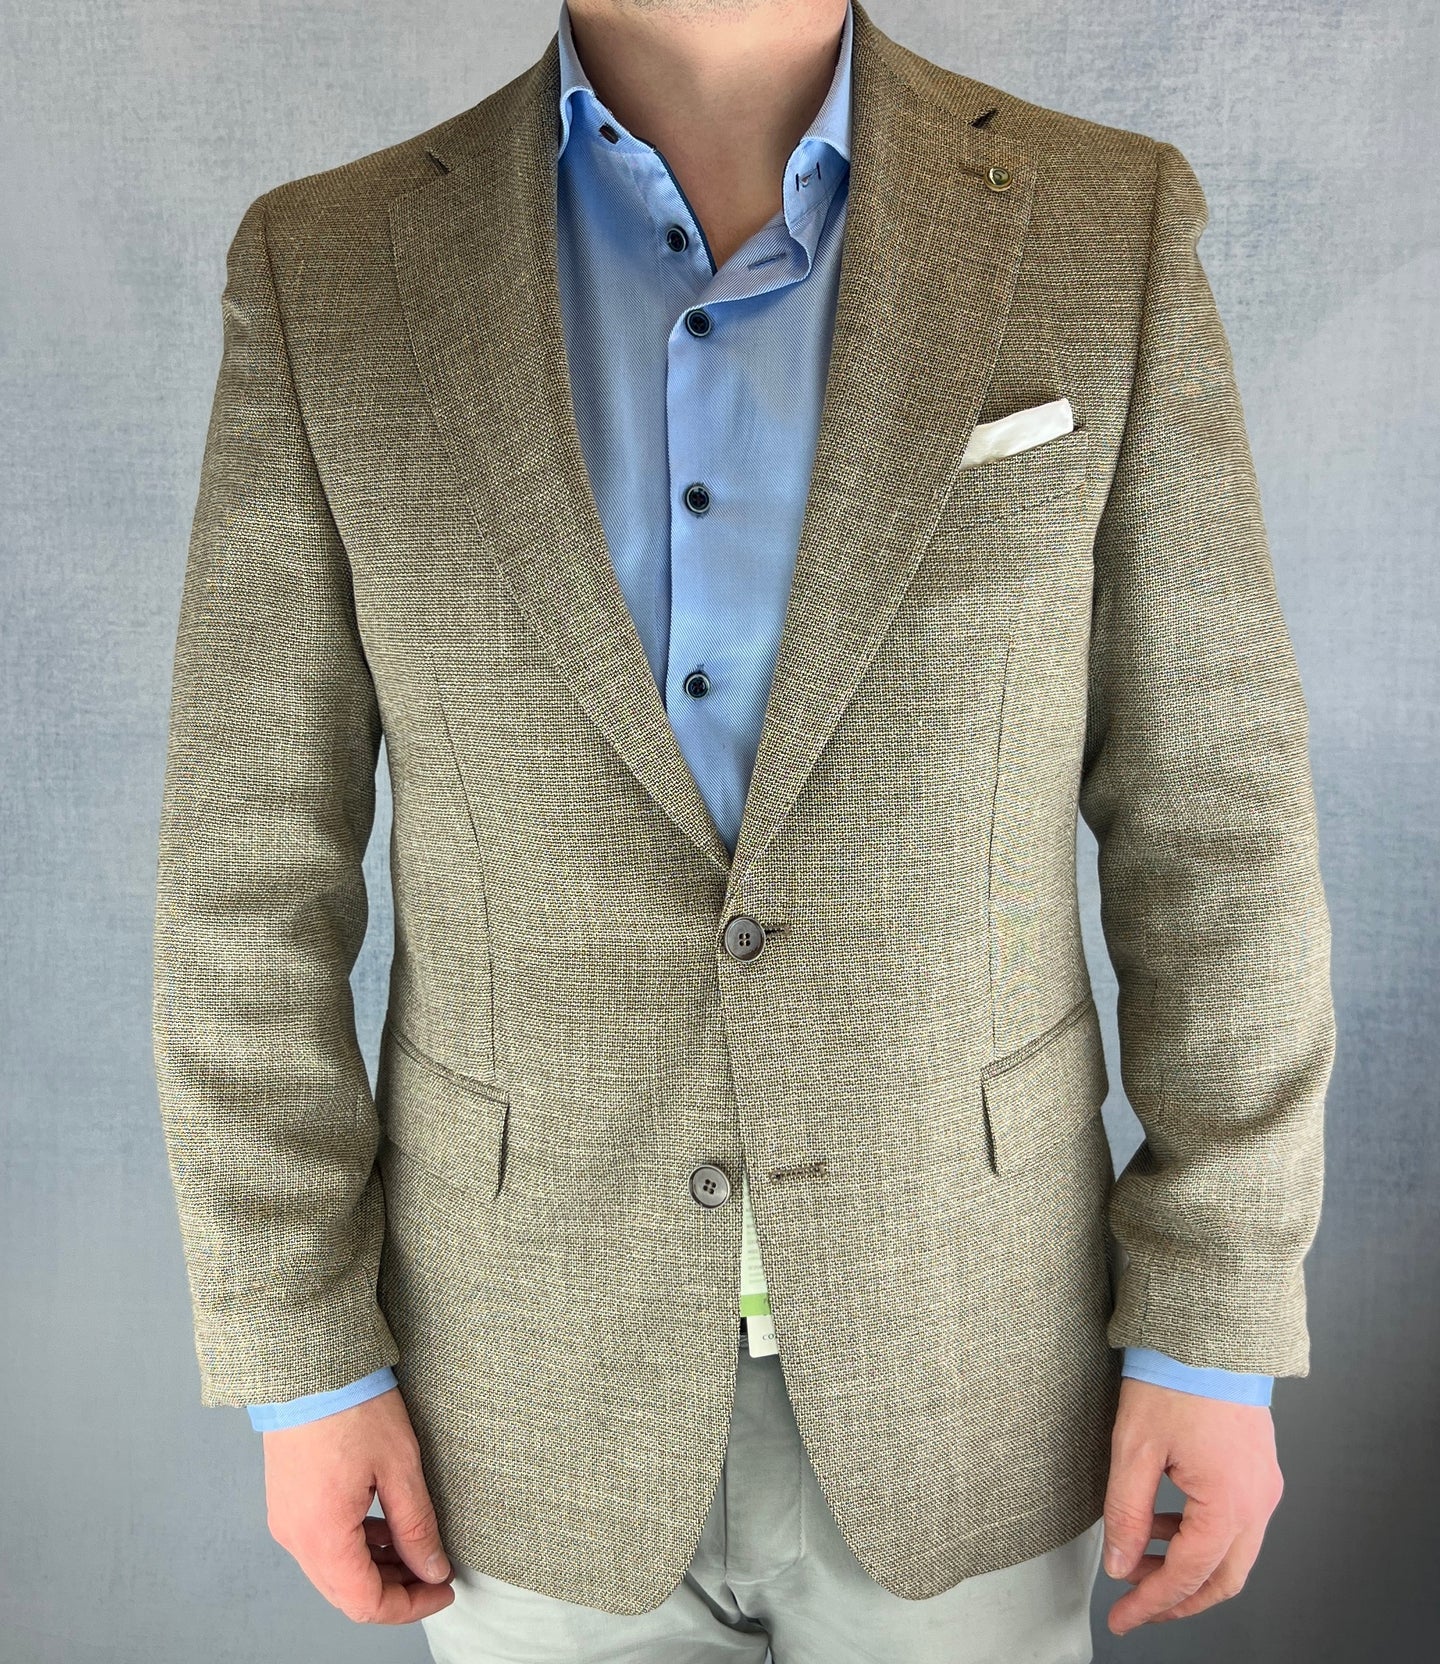 Carl Gross 41326so 71 | Taupe Structured Sports Jacket in Regular Fit